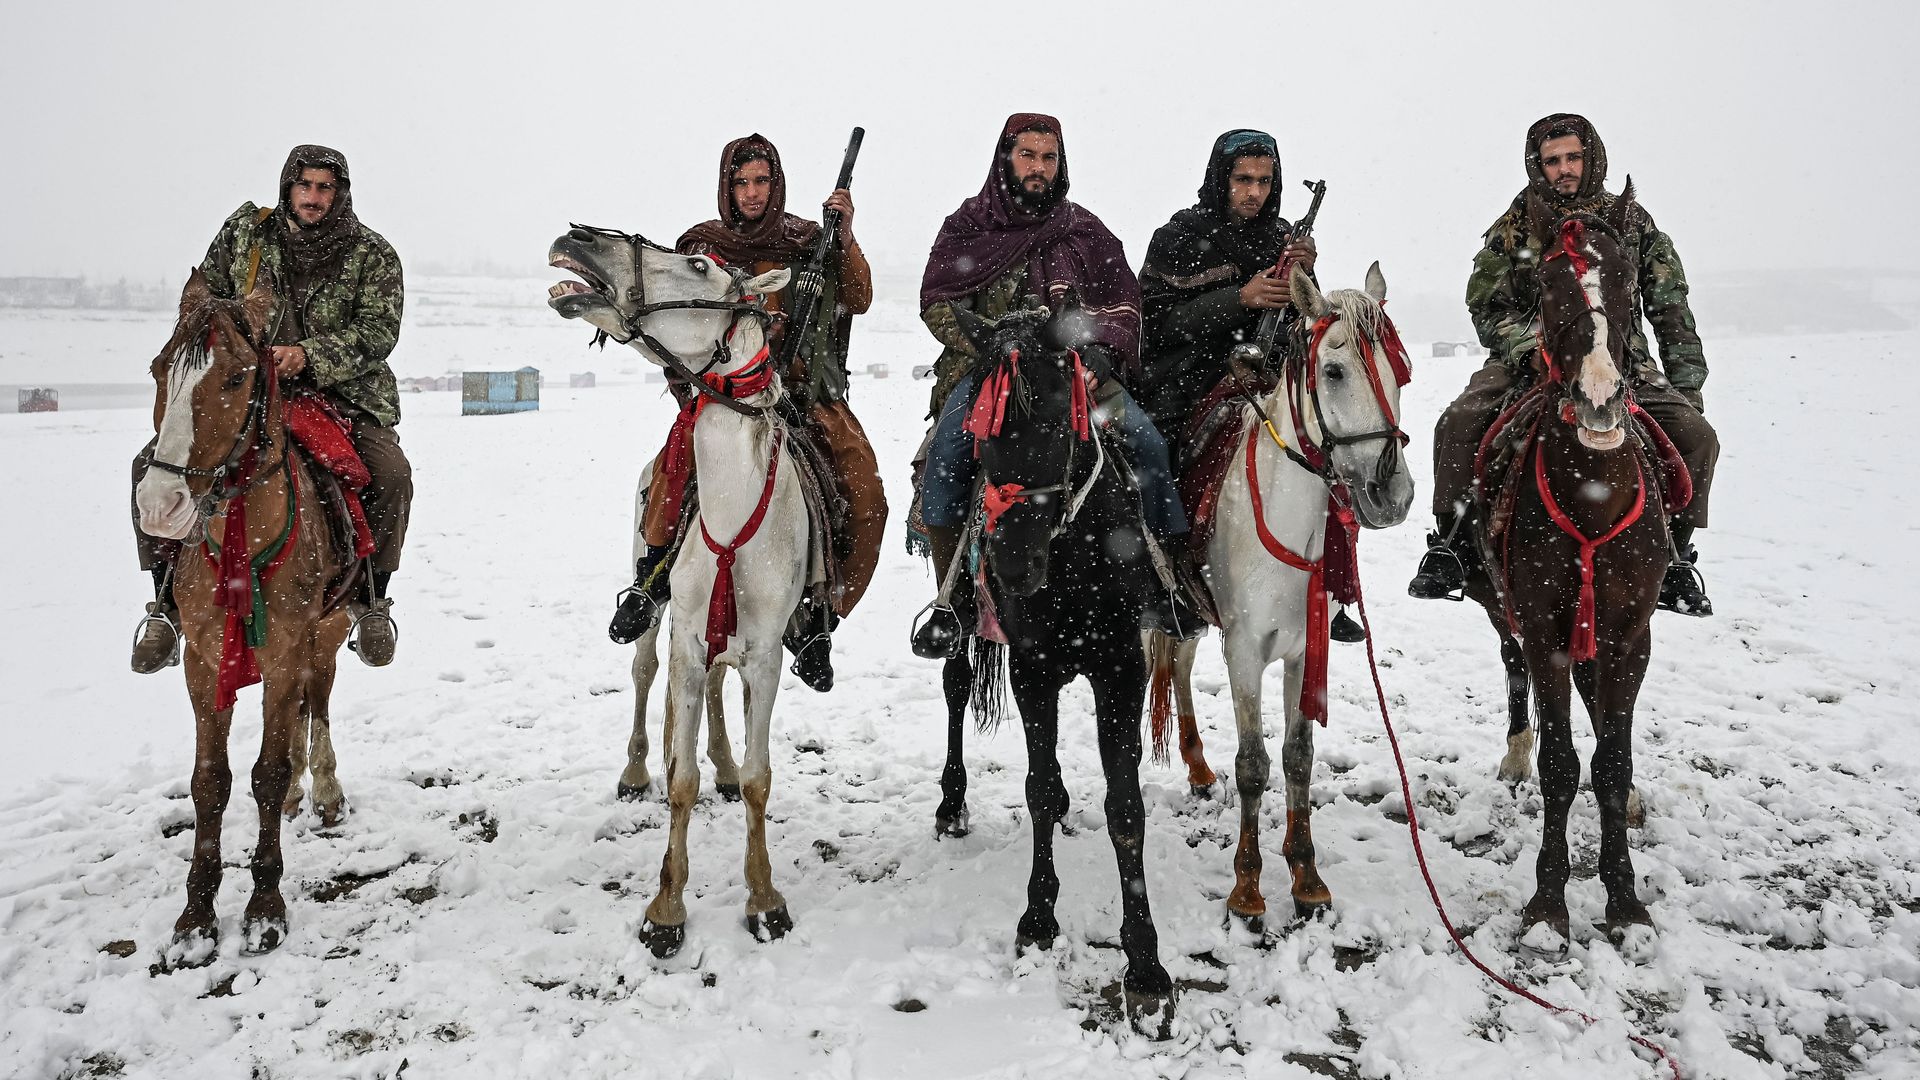  Taliban fighters riding horses during a snowfall at the Qargha lake in Kabul on January 3.